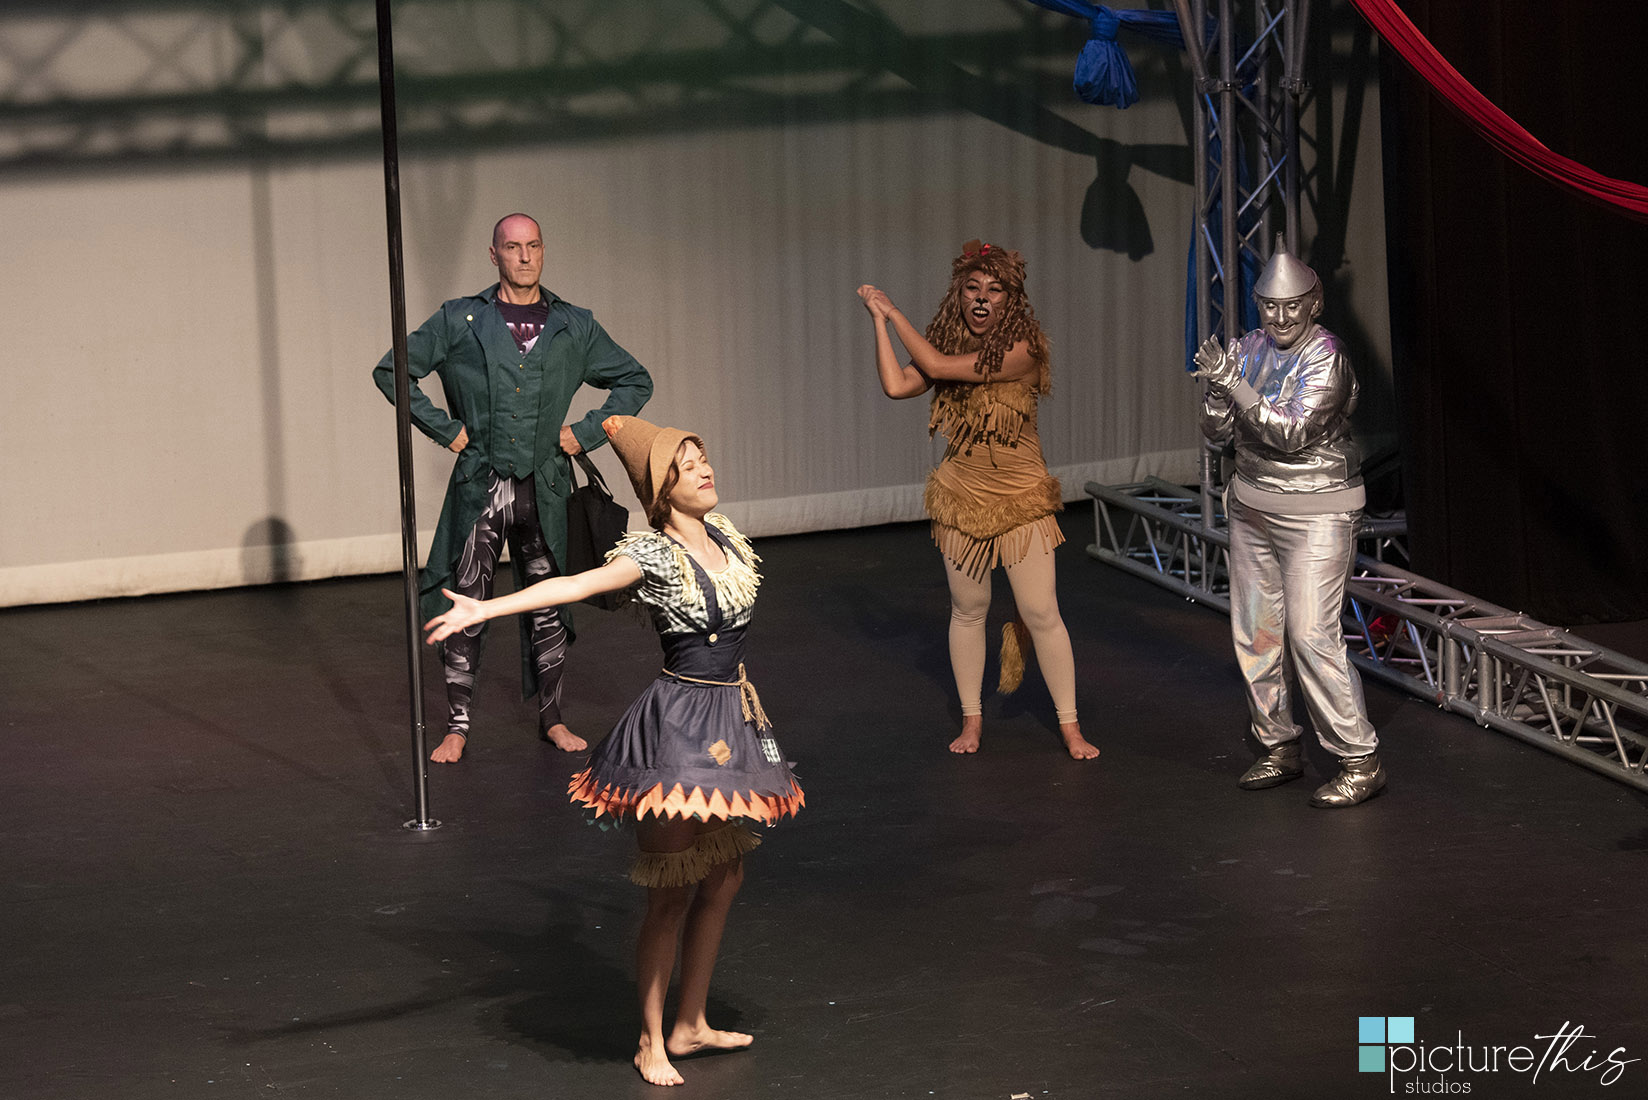 Picture This Studios and Heather Holt Photography captured the Quintessential Movement Performance of the Wizard of Oz at the Grand Cayman Harquail Theatre